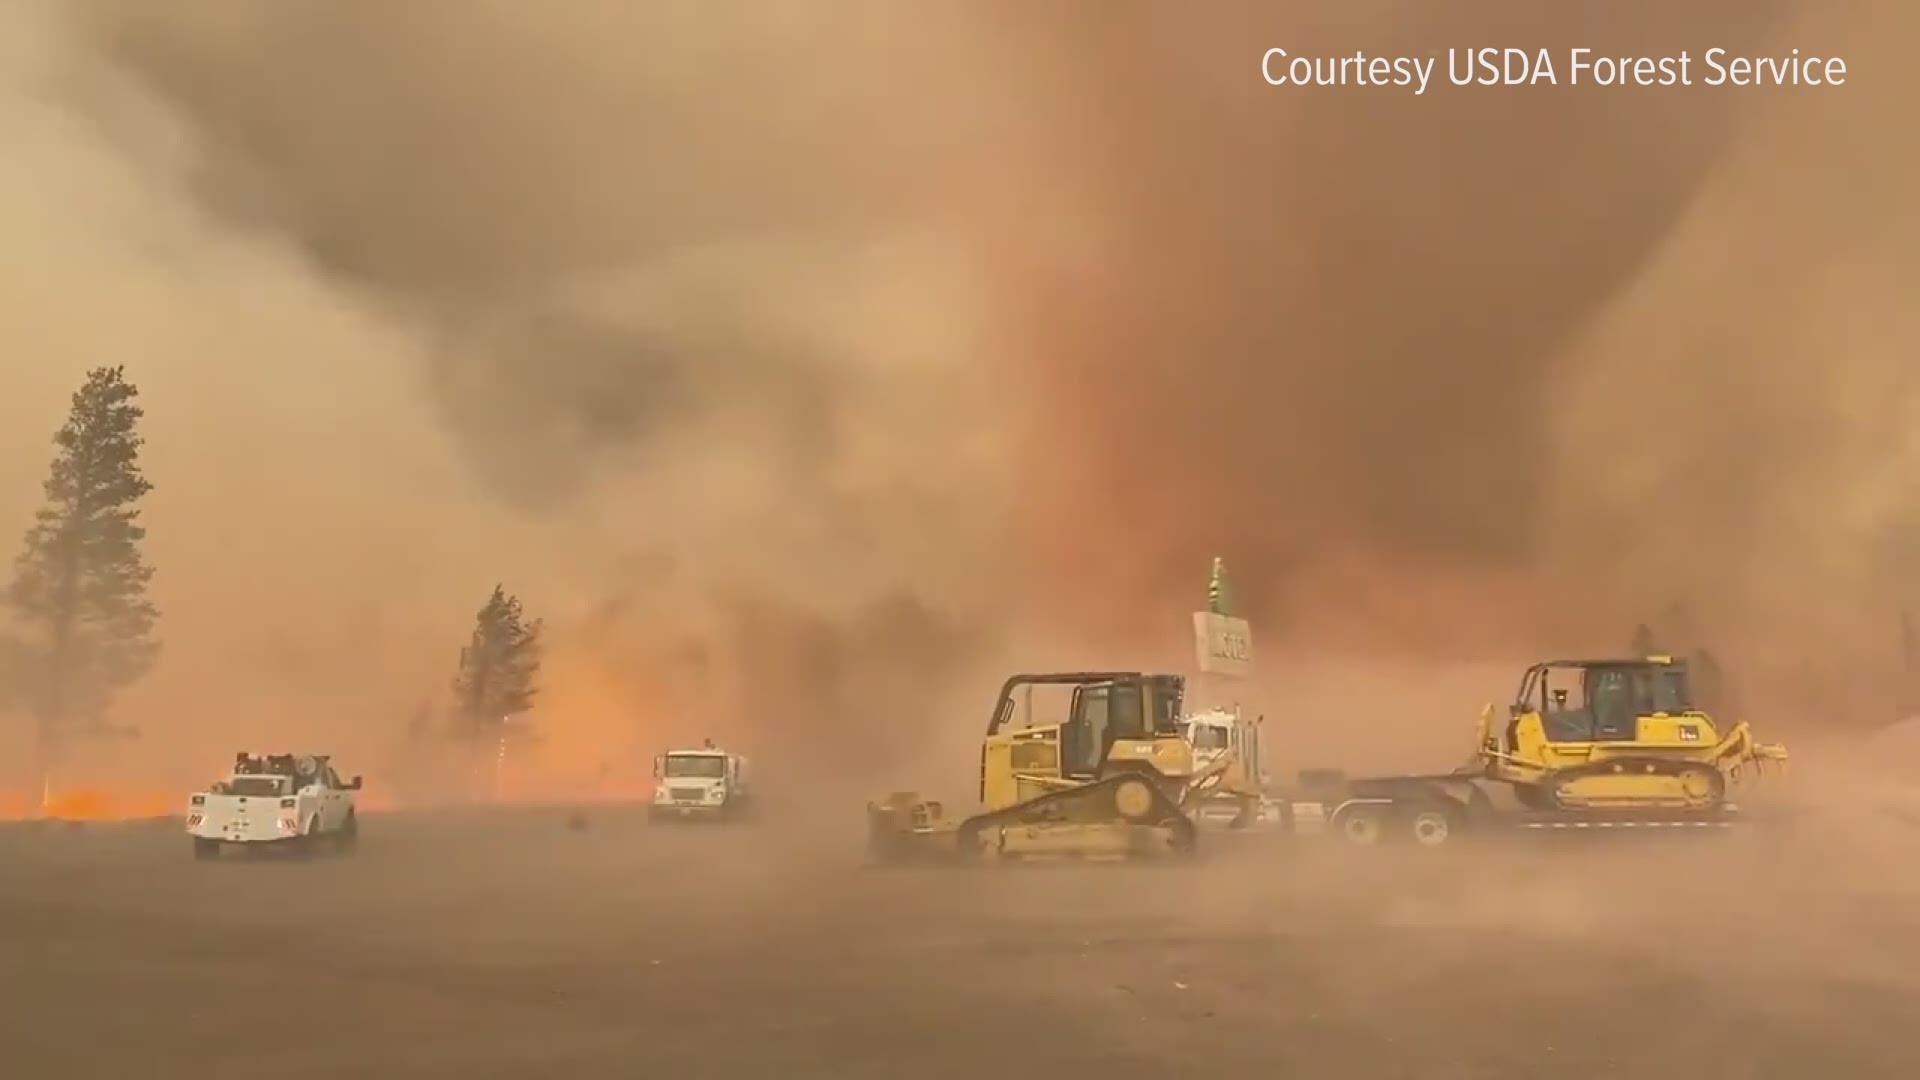 The footage was captured by the USDA Forest Service late in June as the fire burned in Siskiyou County.